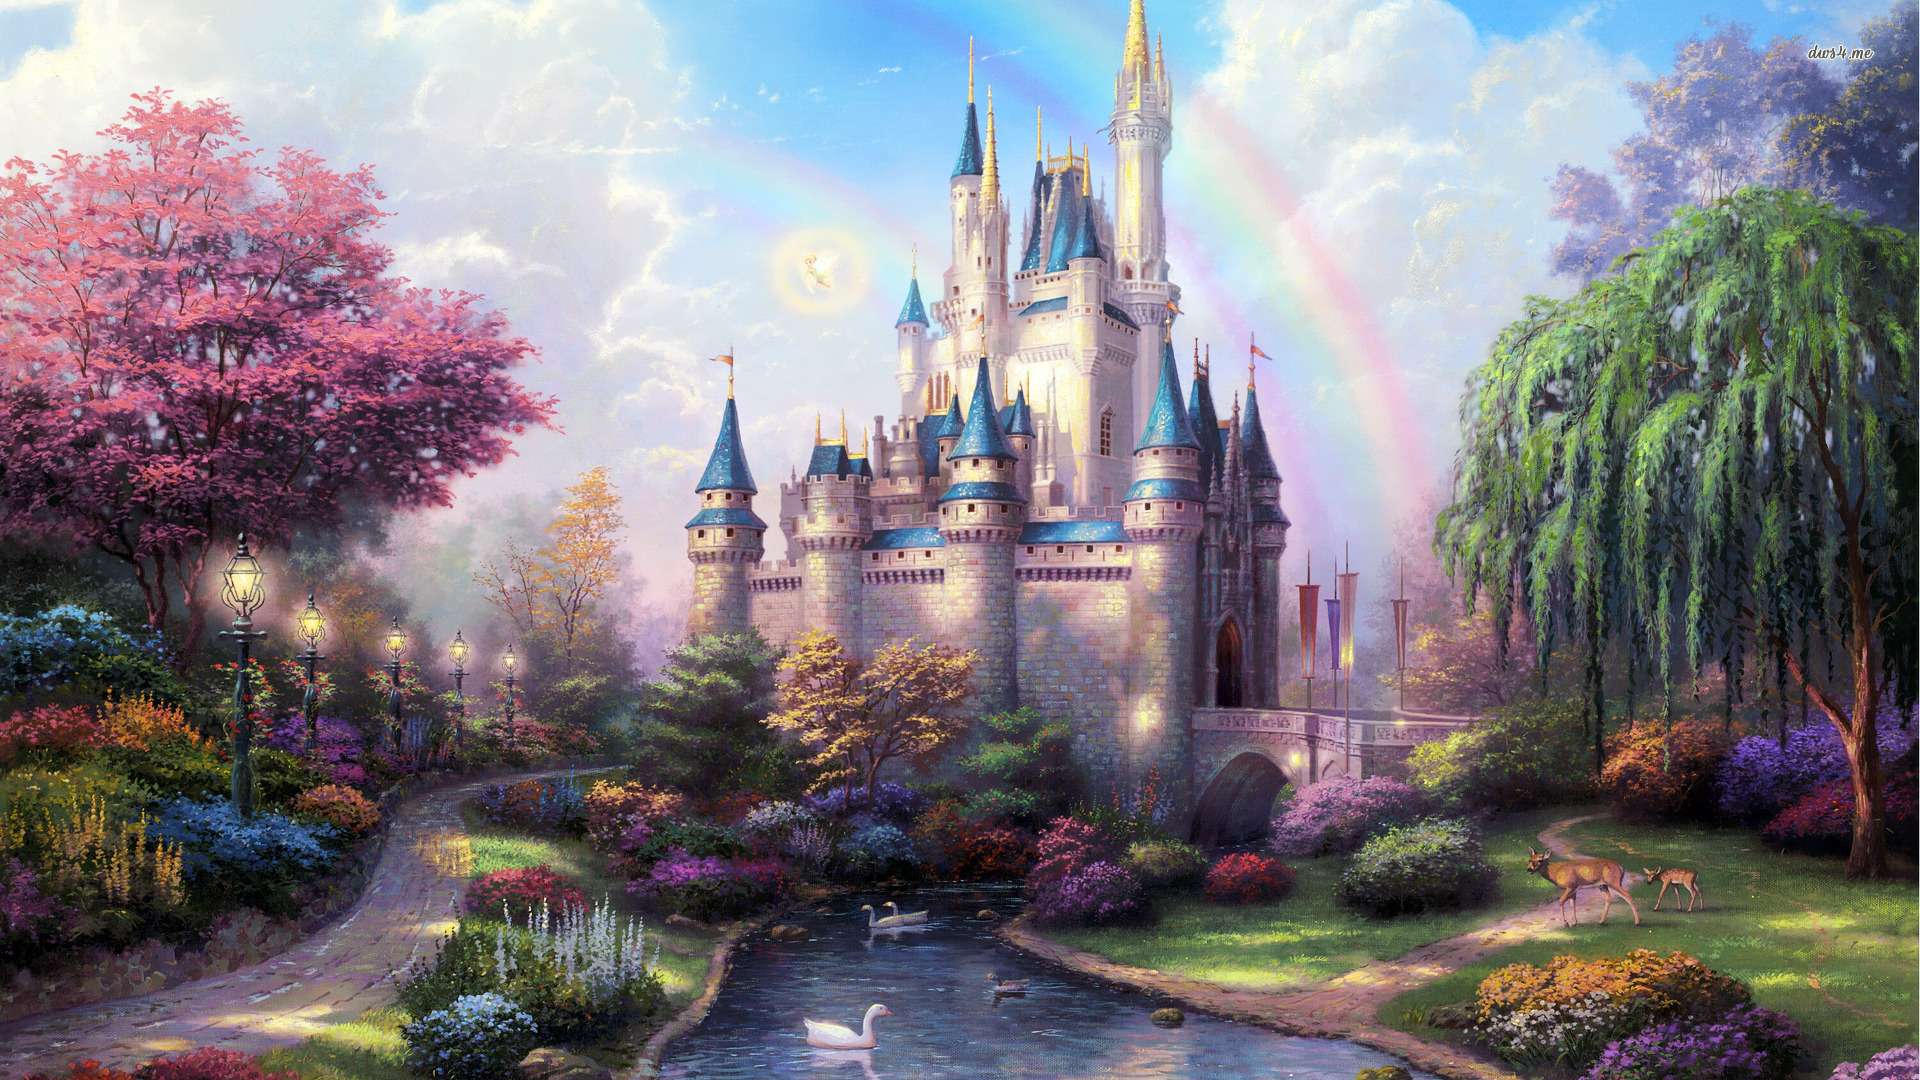 Fairy Tale Castle Wallpaper Was Posted In